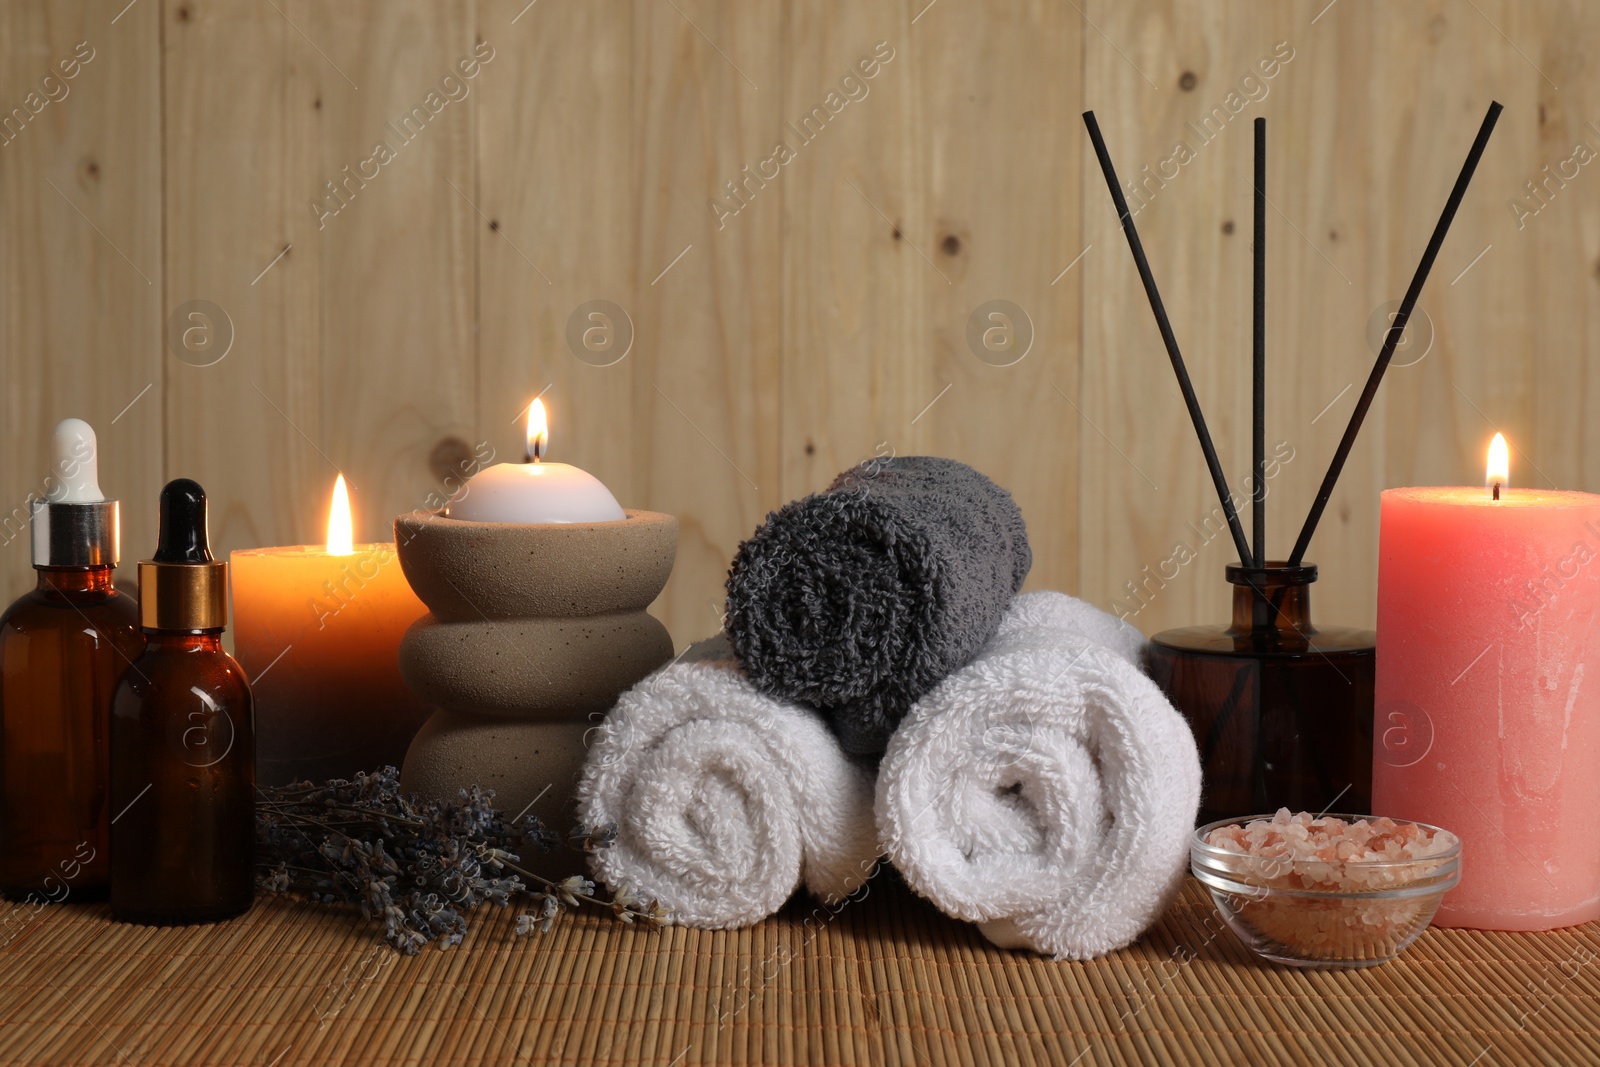 Photo of Aromatherapy. Scented candles, bottles, lavender, towels and sea salt on bamboo mat